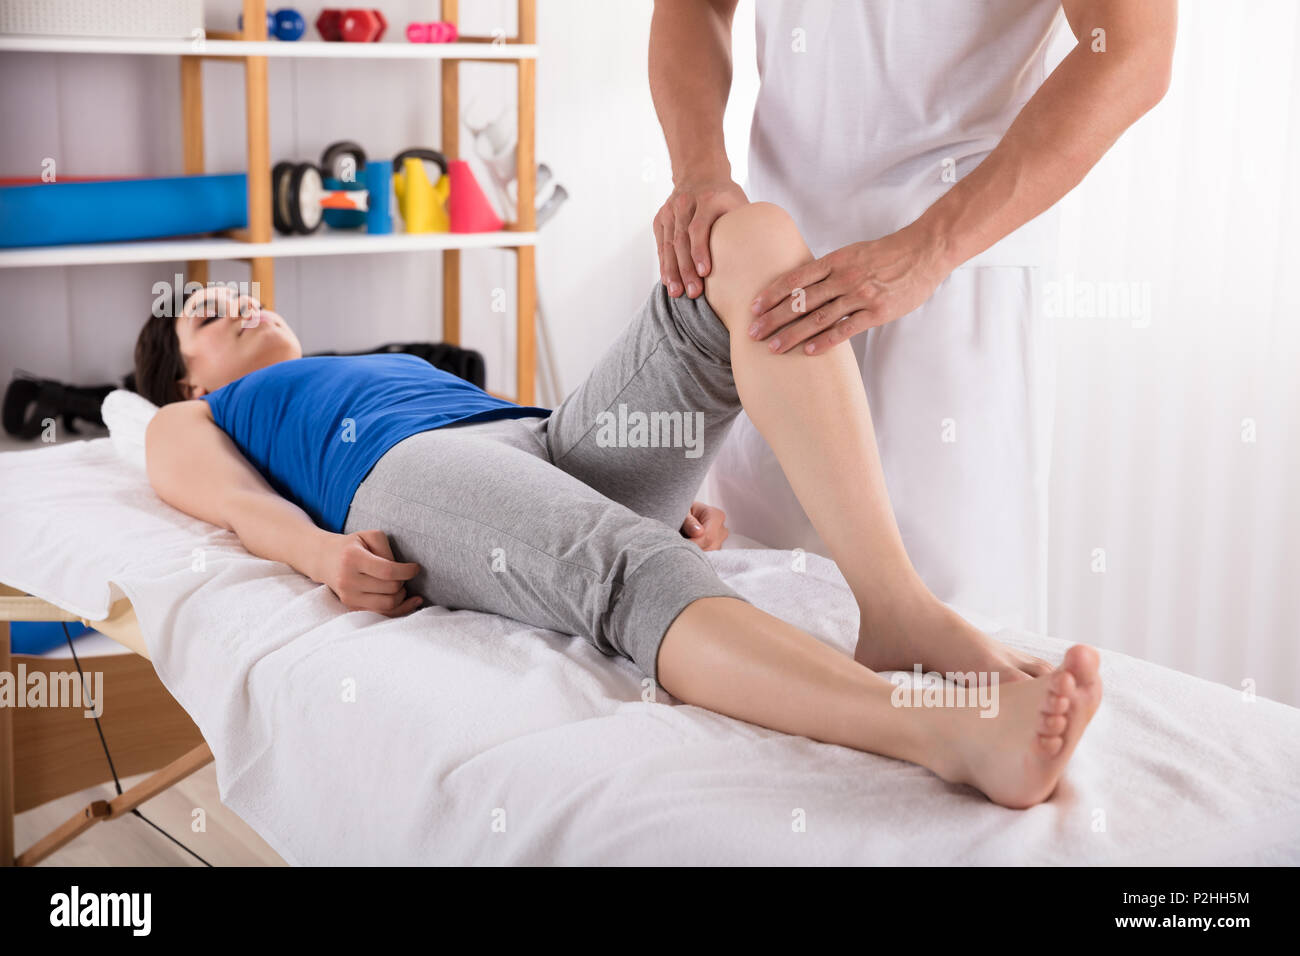 Woman Lying On Bed Receiving Leg Massage By Physiotherapist Stock Photo